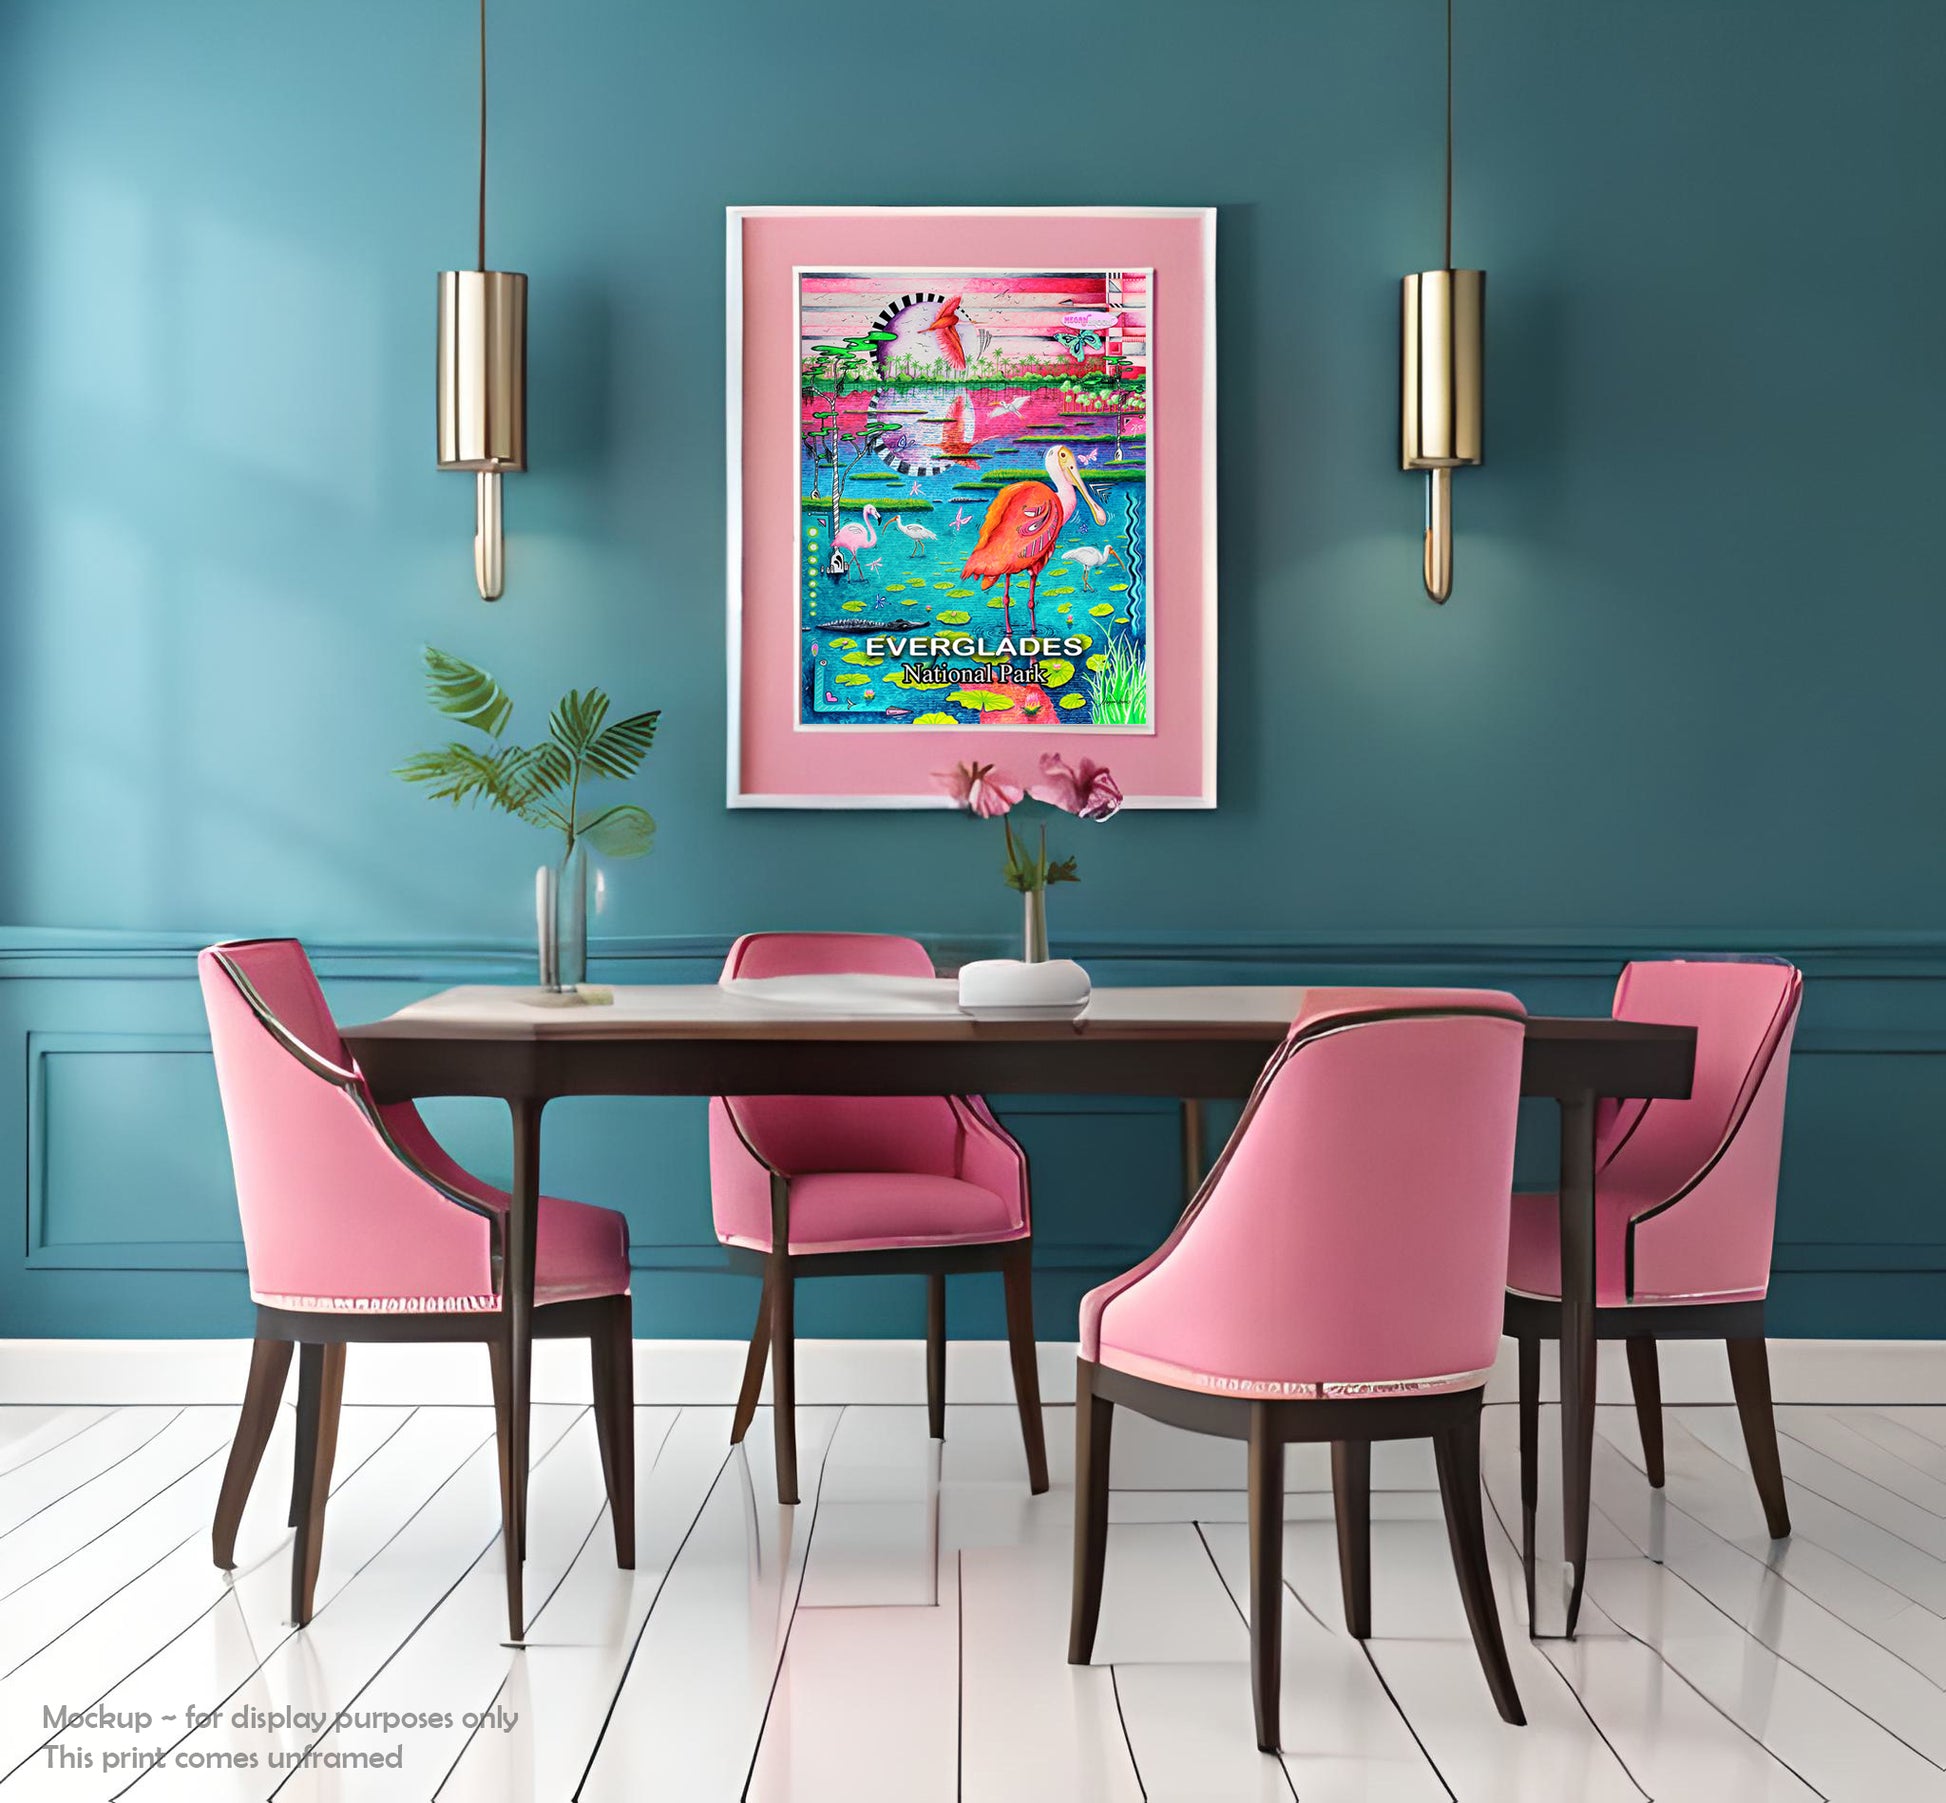 everglades national park travel poster print in a whimsical, colorful pop art style by traveling artist meganaroon in a pink mat white frame in a dining room pink and blue 